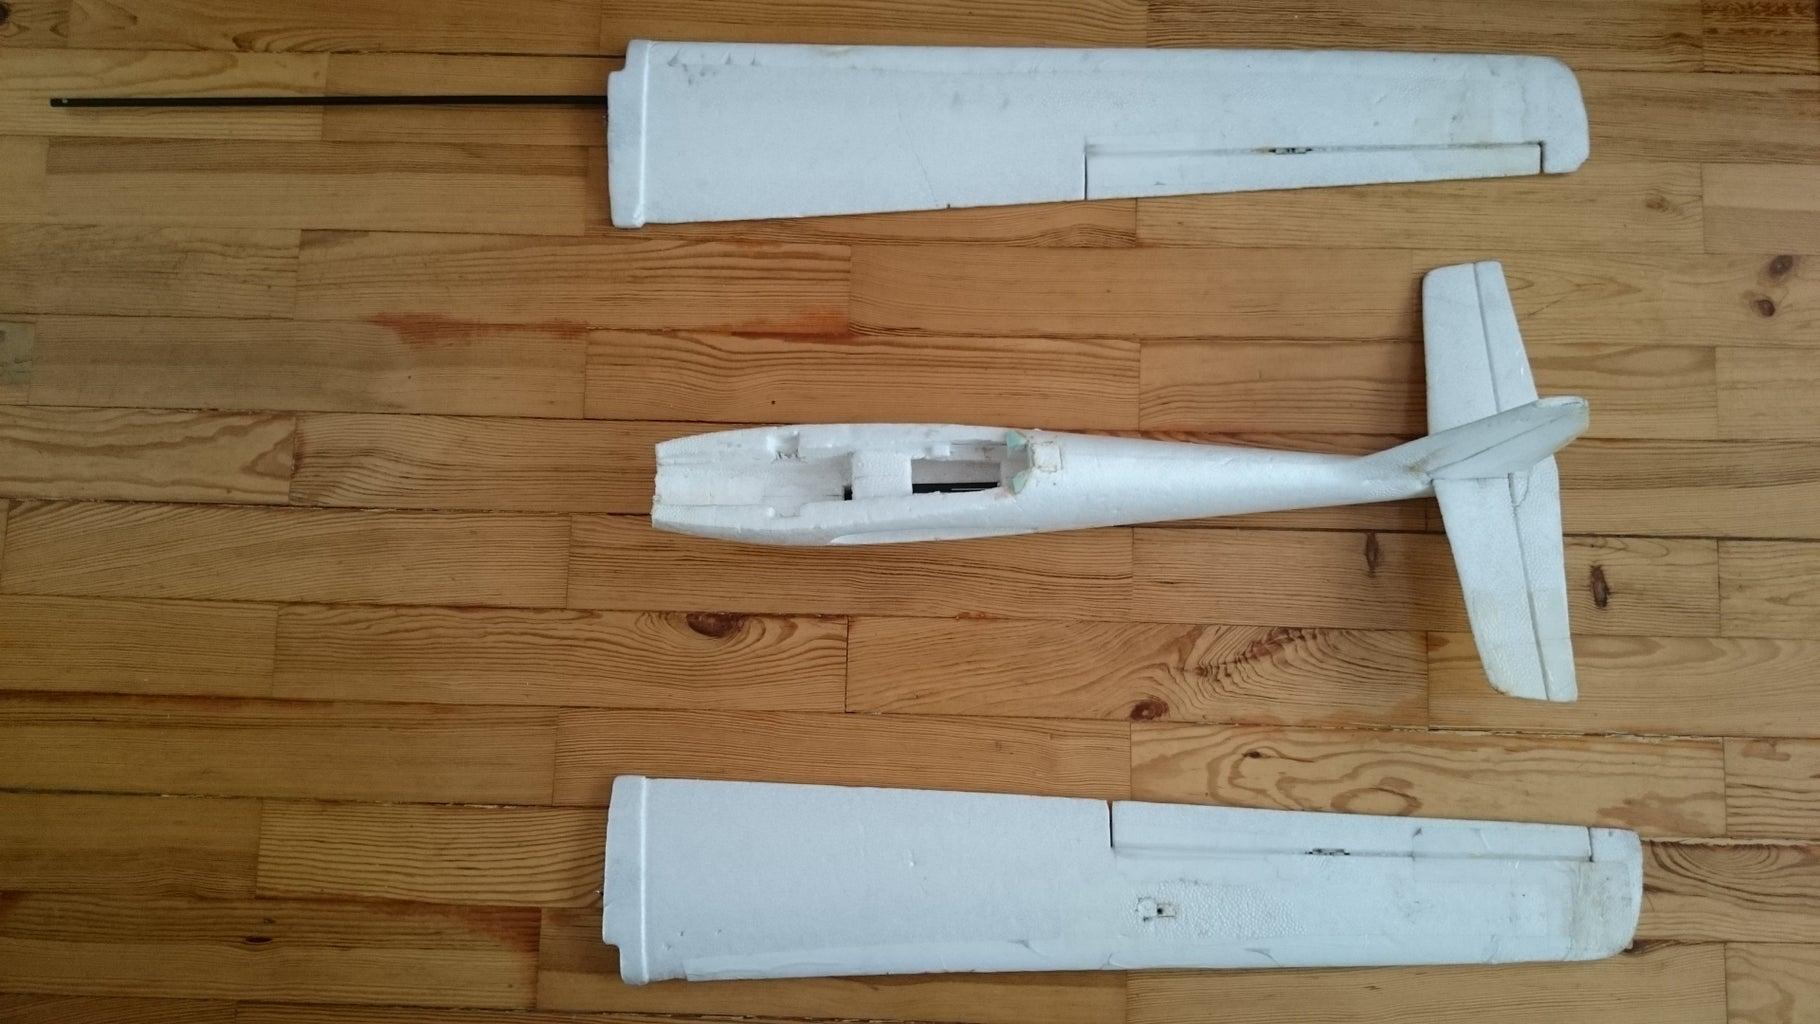 Remote Rc Plane:  Short steps to build a remote-controlled plane